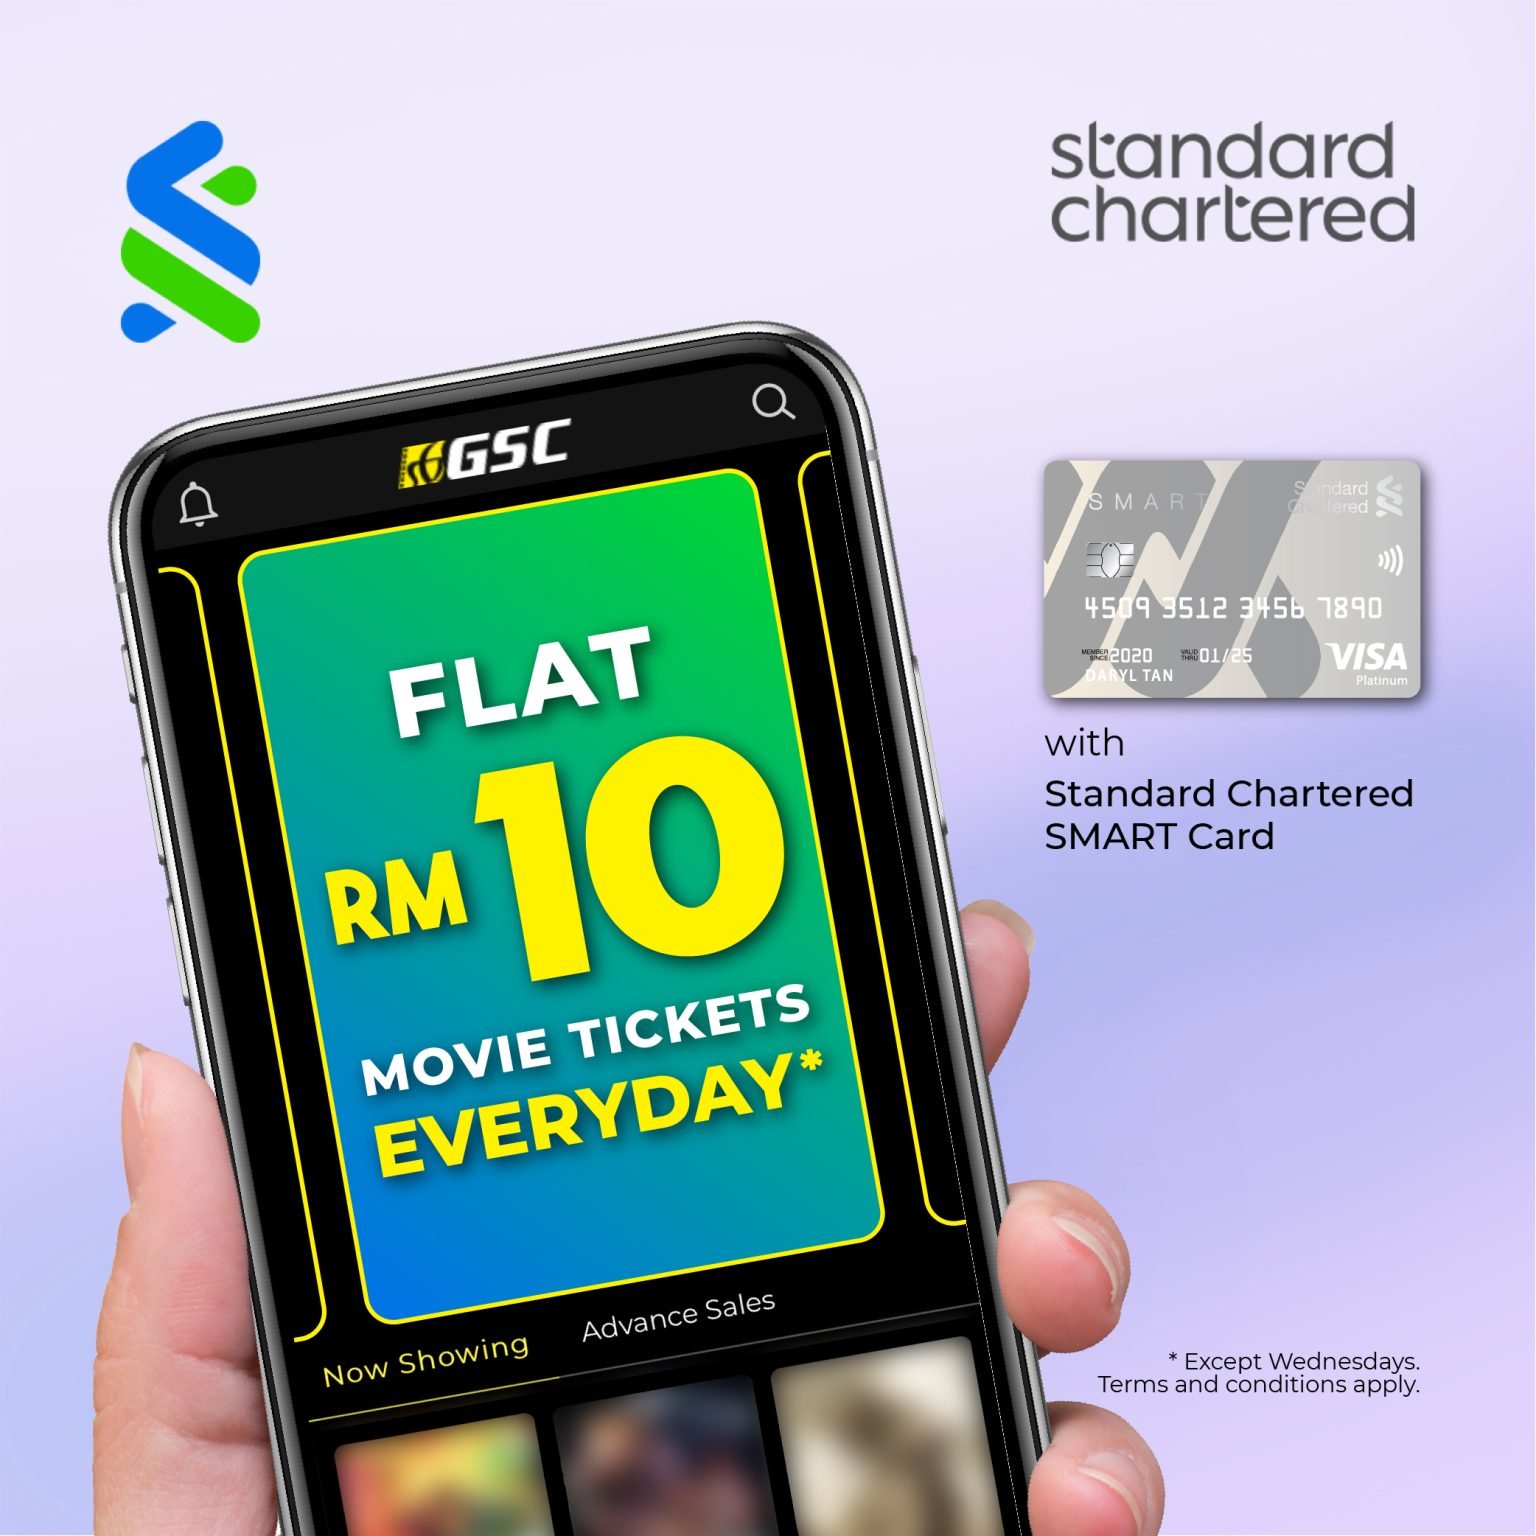 GSC Movie Ticket Price RM10 for Standard Chartered SMART Cardmembers